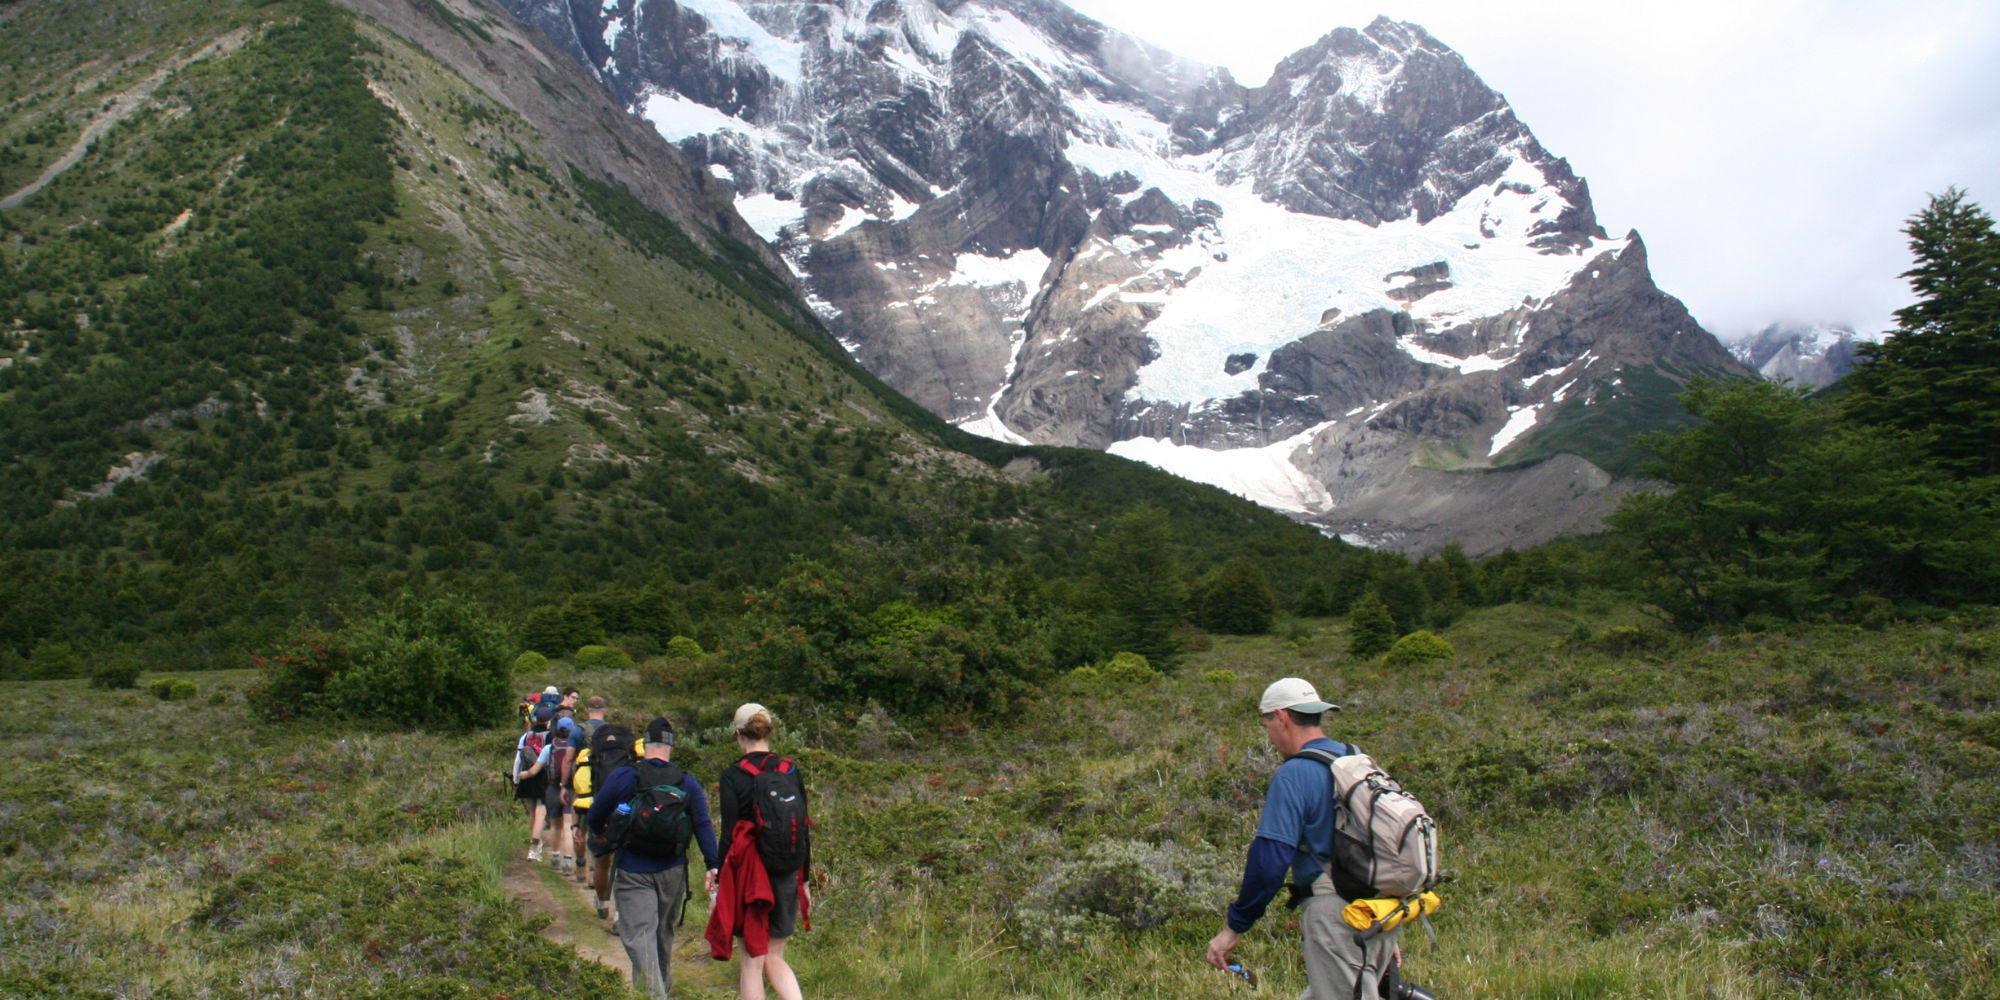 Trekking at the Tip of the World: Patagonia